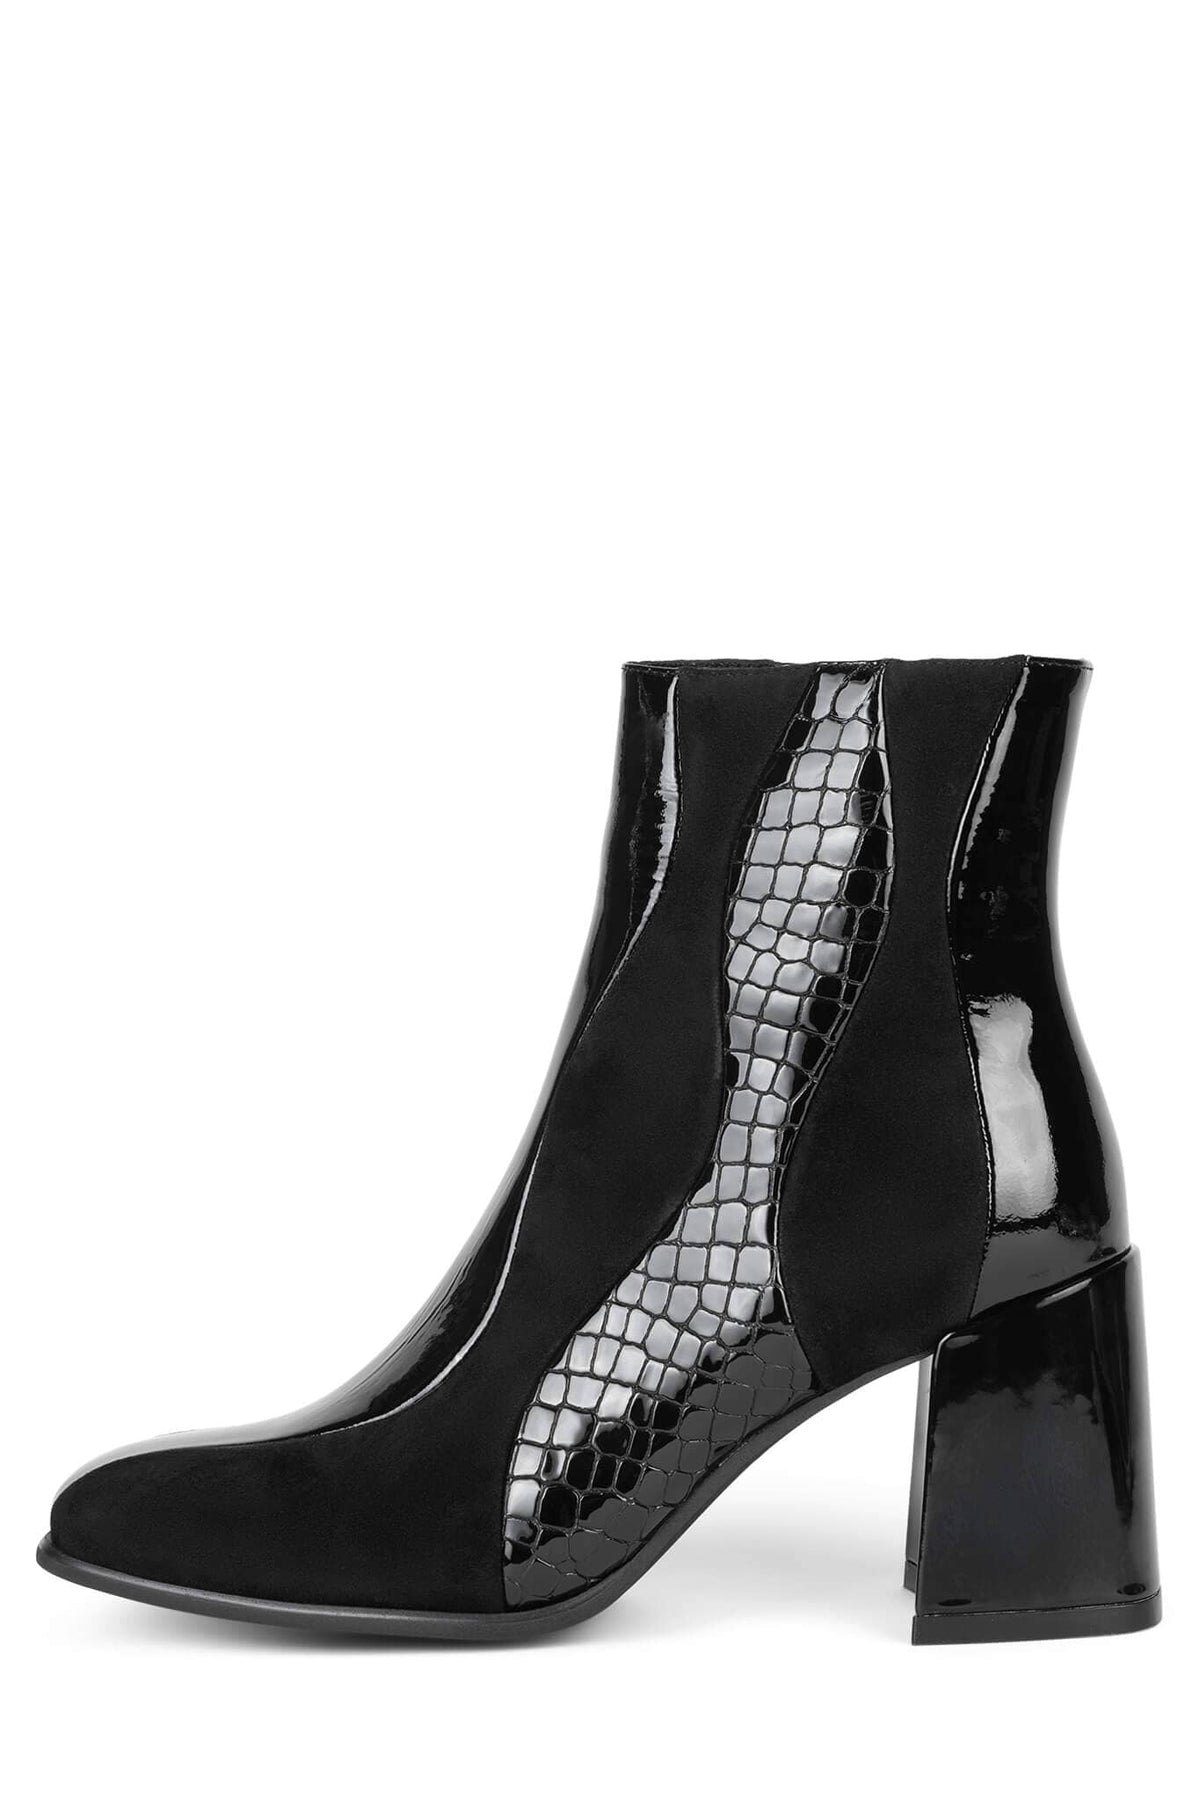 LAVALAMP Jeffrey Campbell Ankle Boots Black Croco Patent Multi